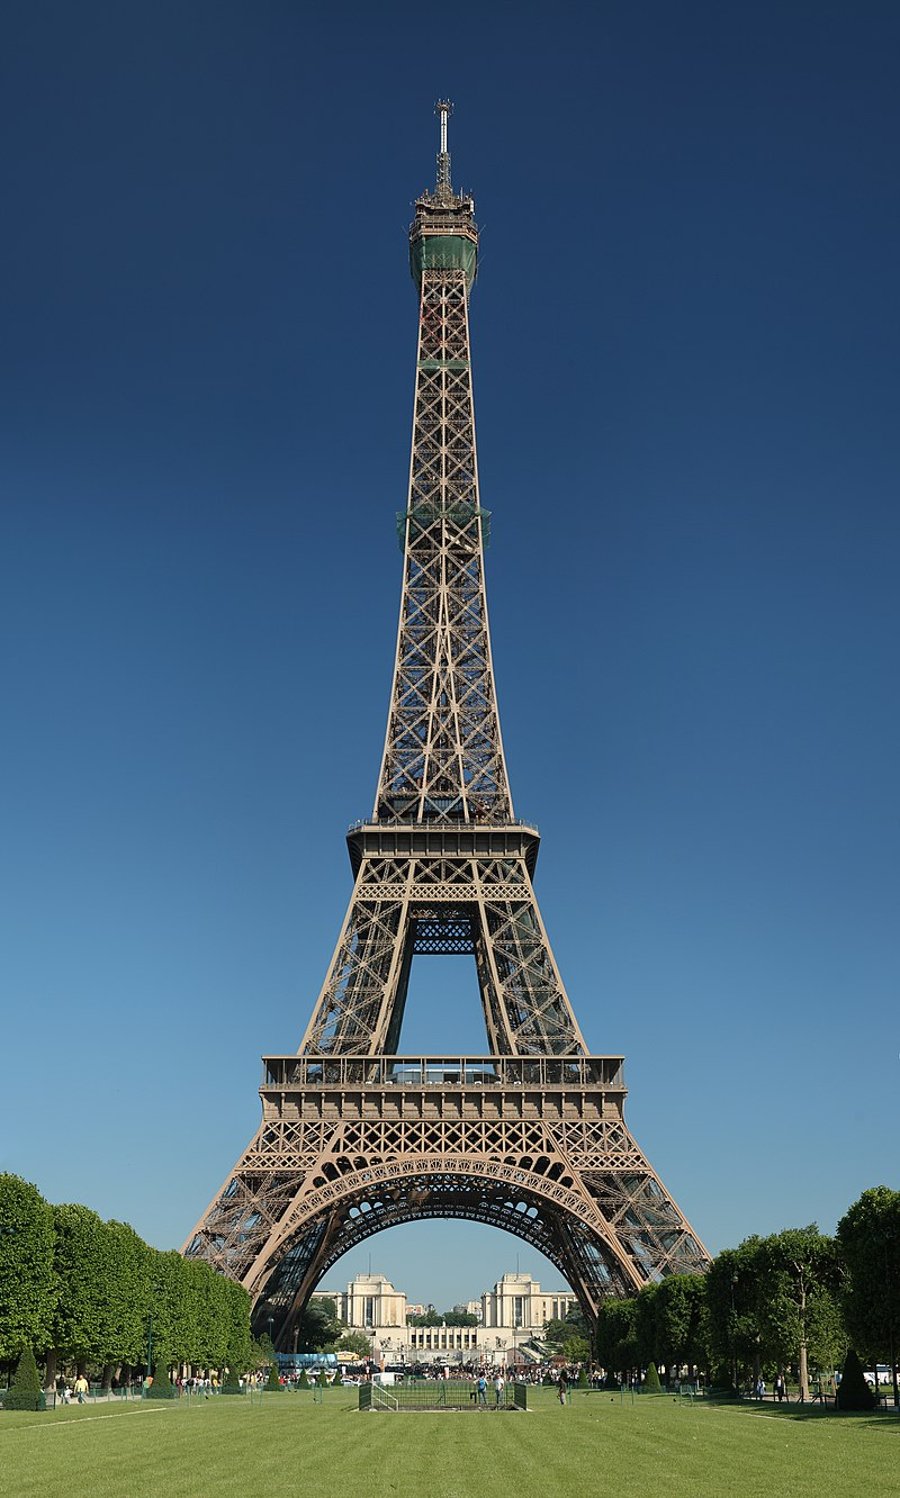 Usually accessible year round, but now shut down due to labor disputes. The Eiffel Tower.